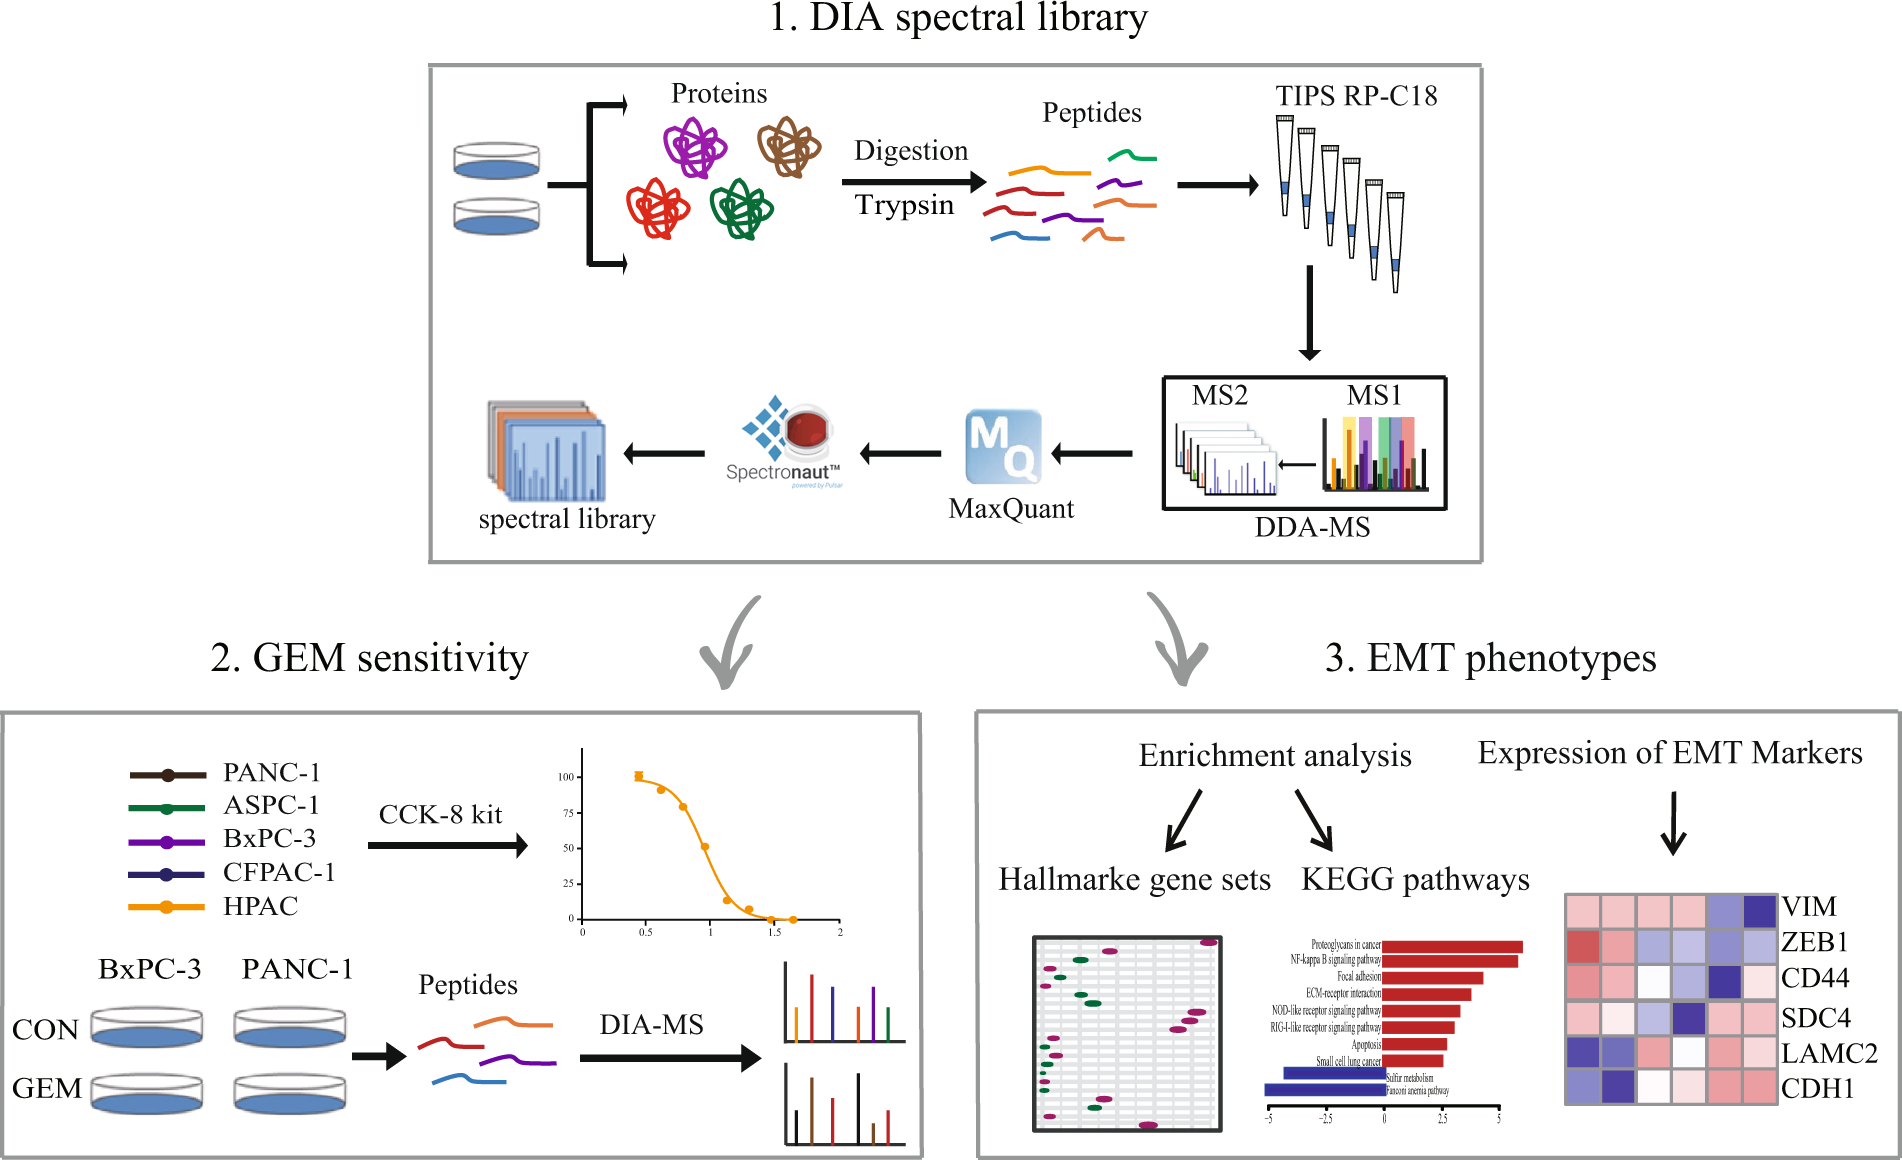 Pancreatic cancer cells spectral library by DIA-MS and the phenotype  analysis of gemcitabine sensitivity | Scientific Data